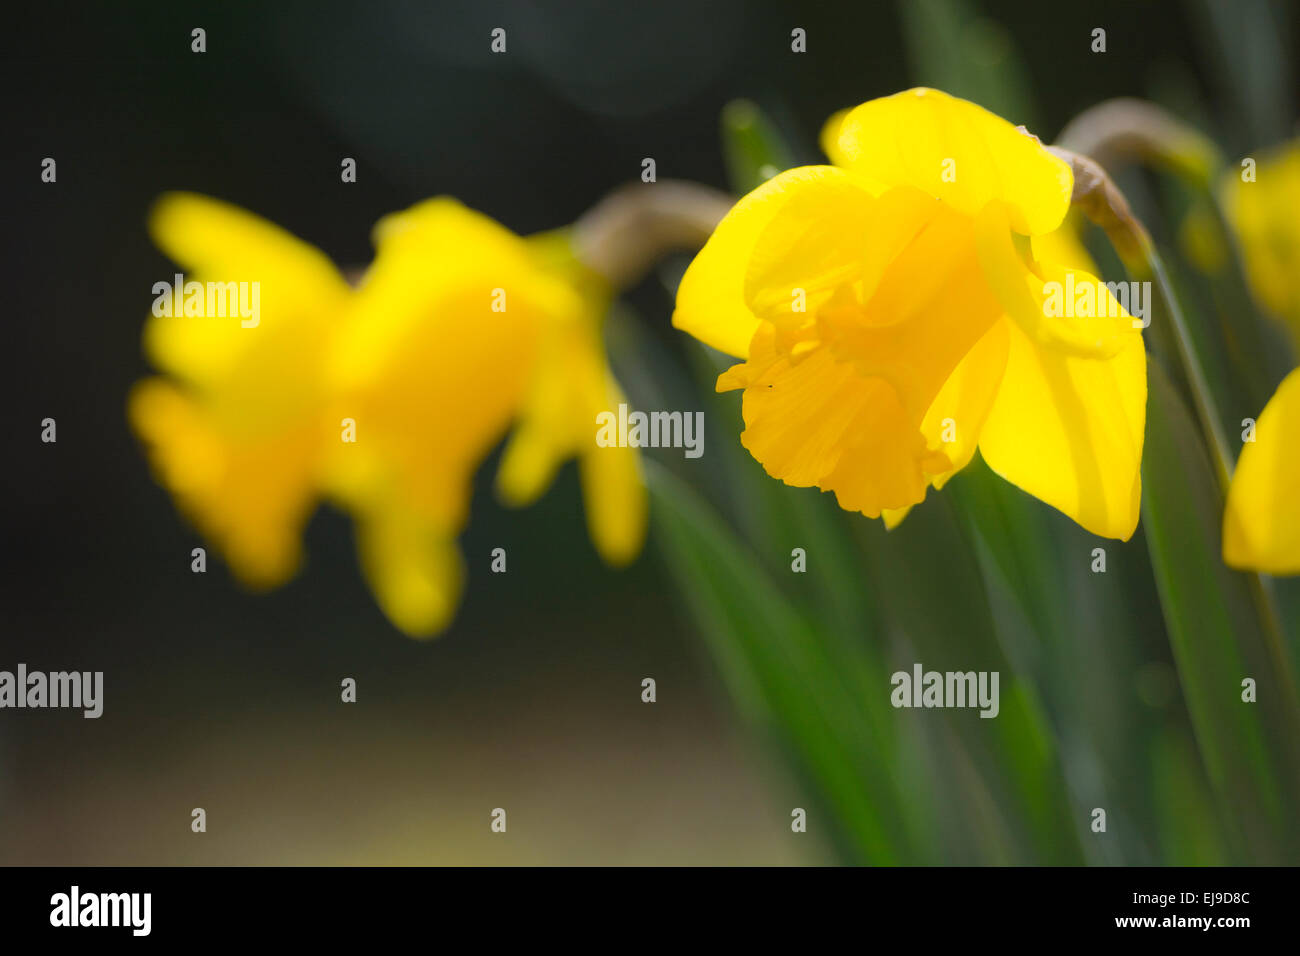 Yellow daffodil flower close up daffodils flowers narcissus Stock Photo